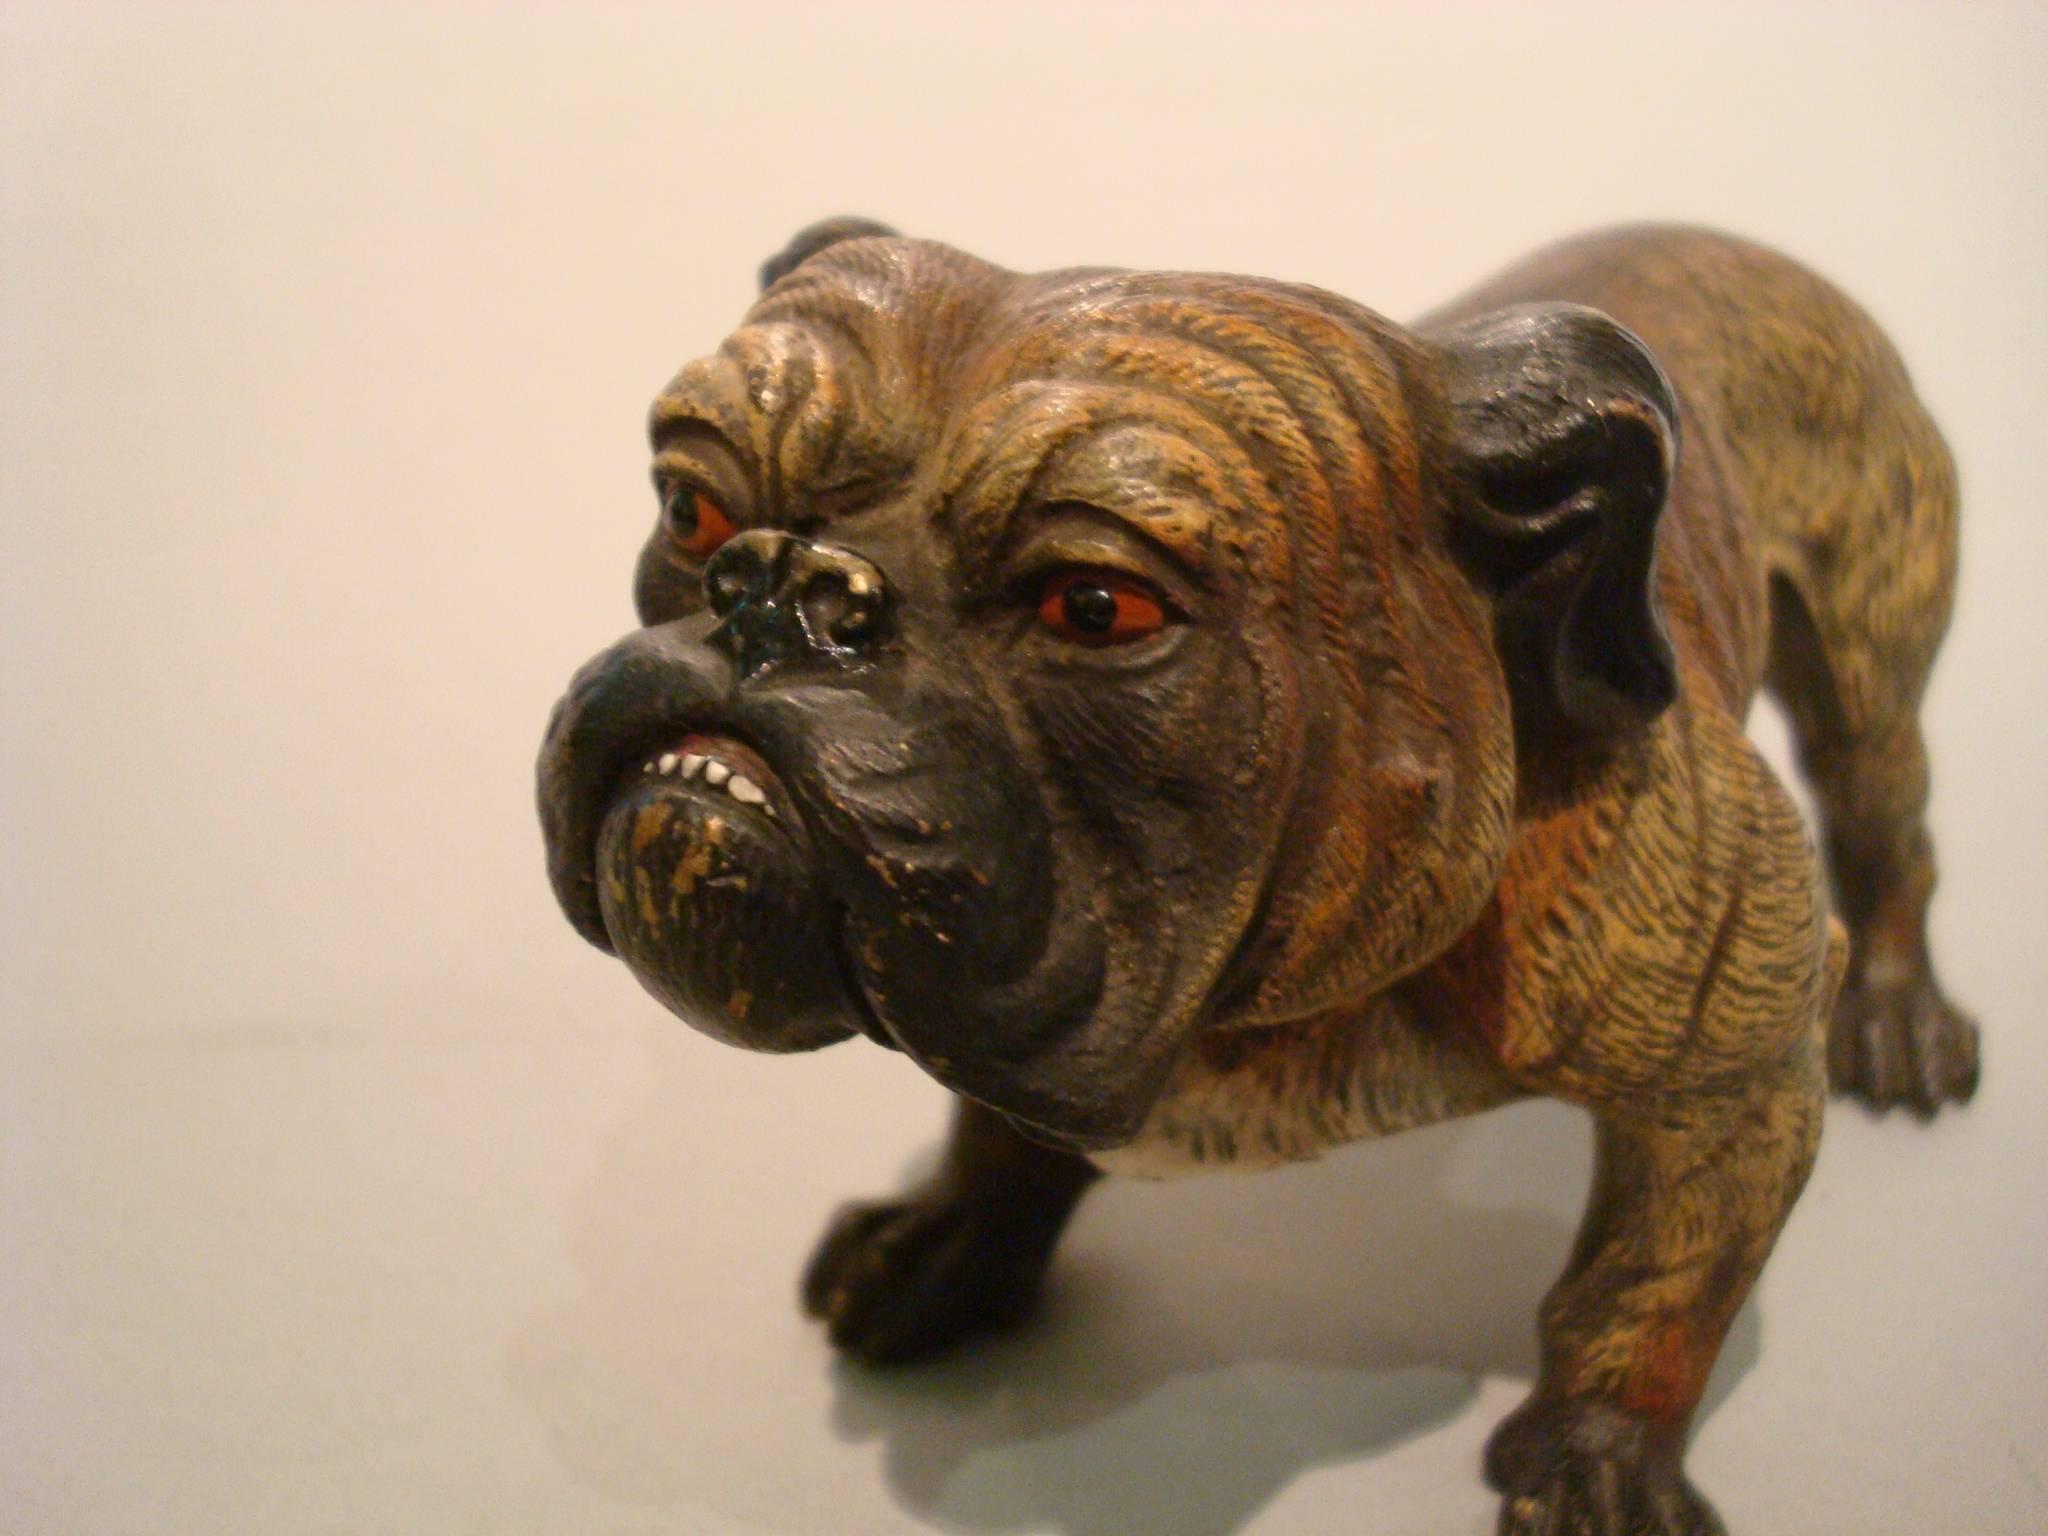 Antique large cold painted Vienna bronze English bulldog. This is a rare model, very lifelike and beautifully sculptured. It's large and heavy enough to be used as a great paper weight. There are no markings or signature. It is in excellent